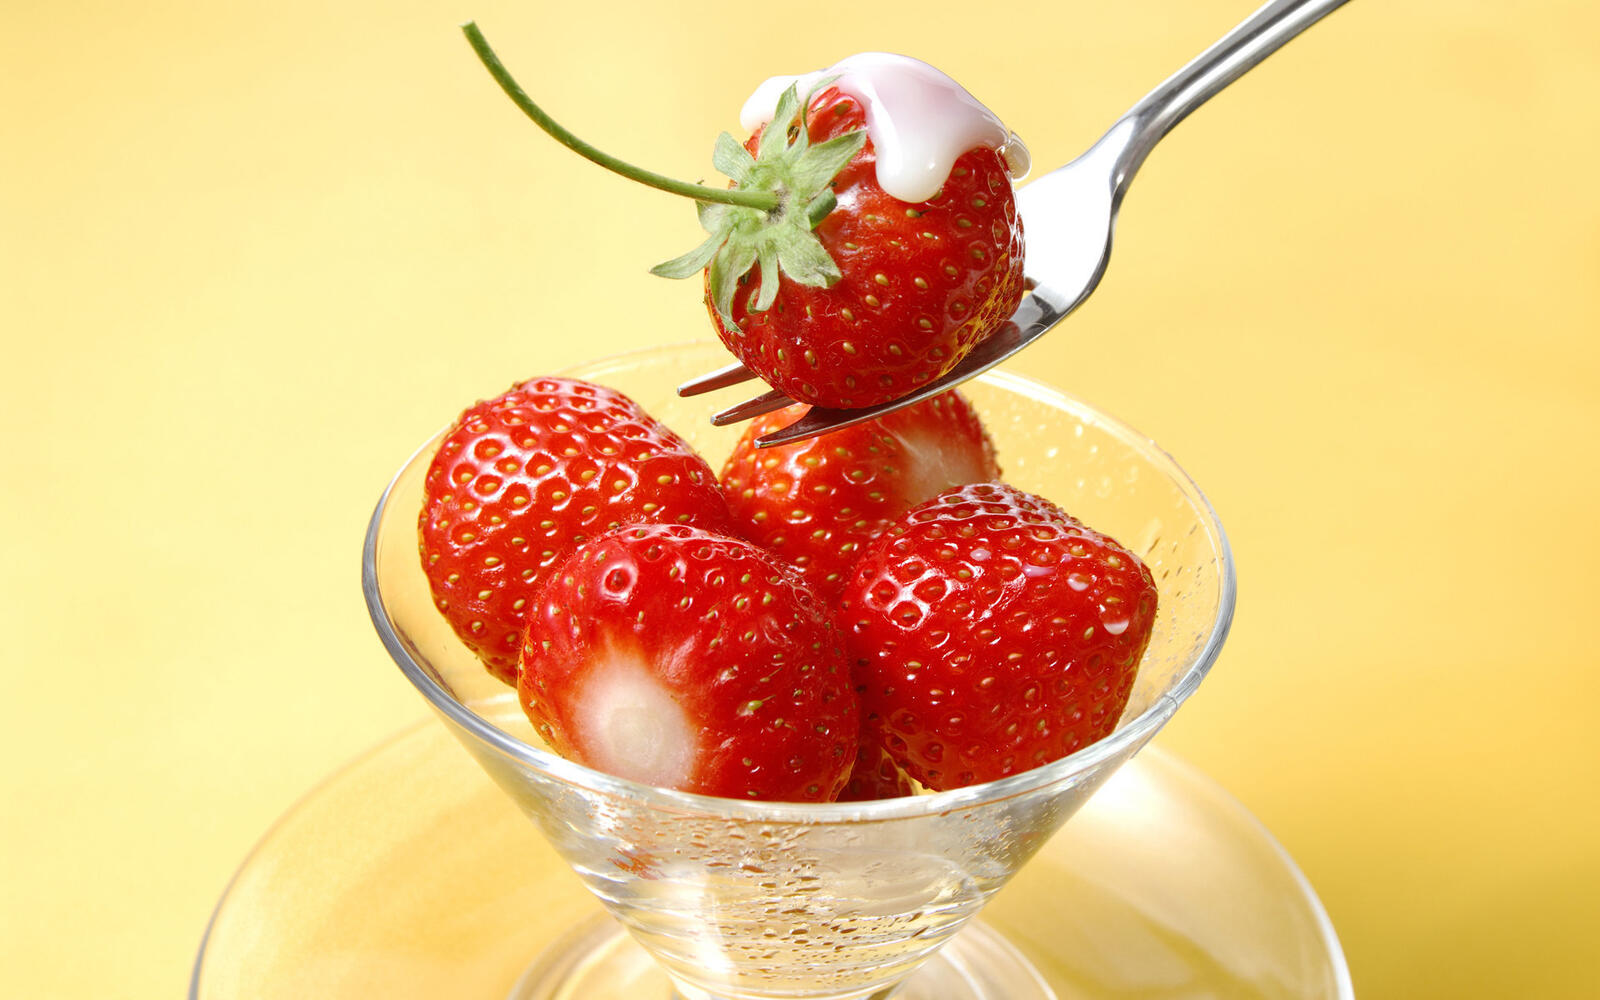 Wallpapers strawberry berry cream on the desktop